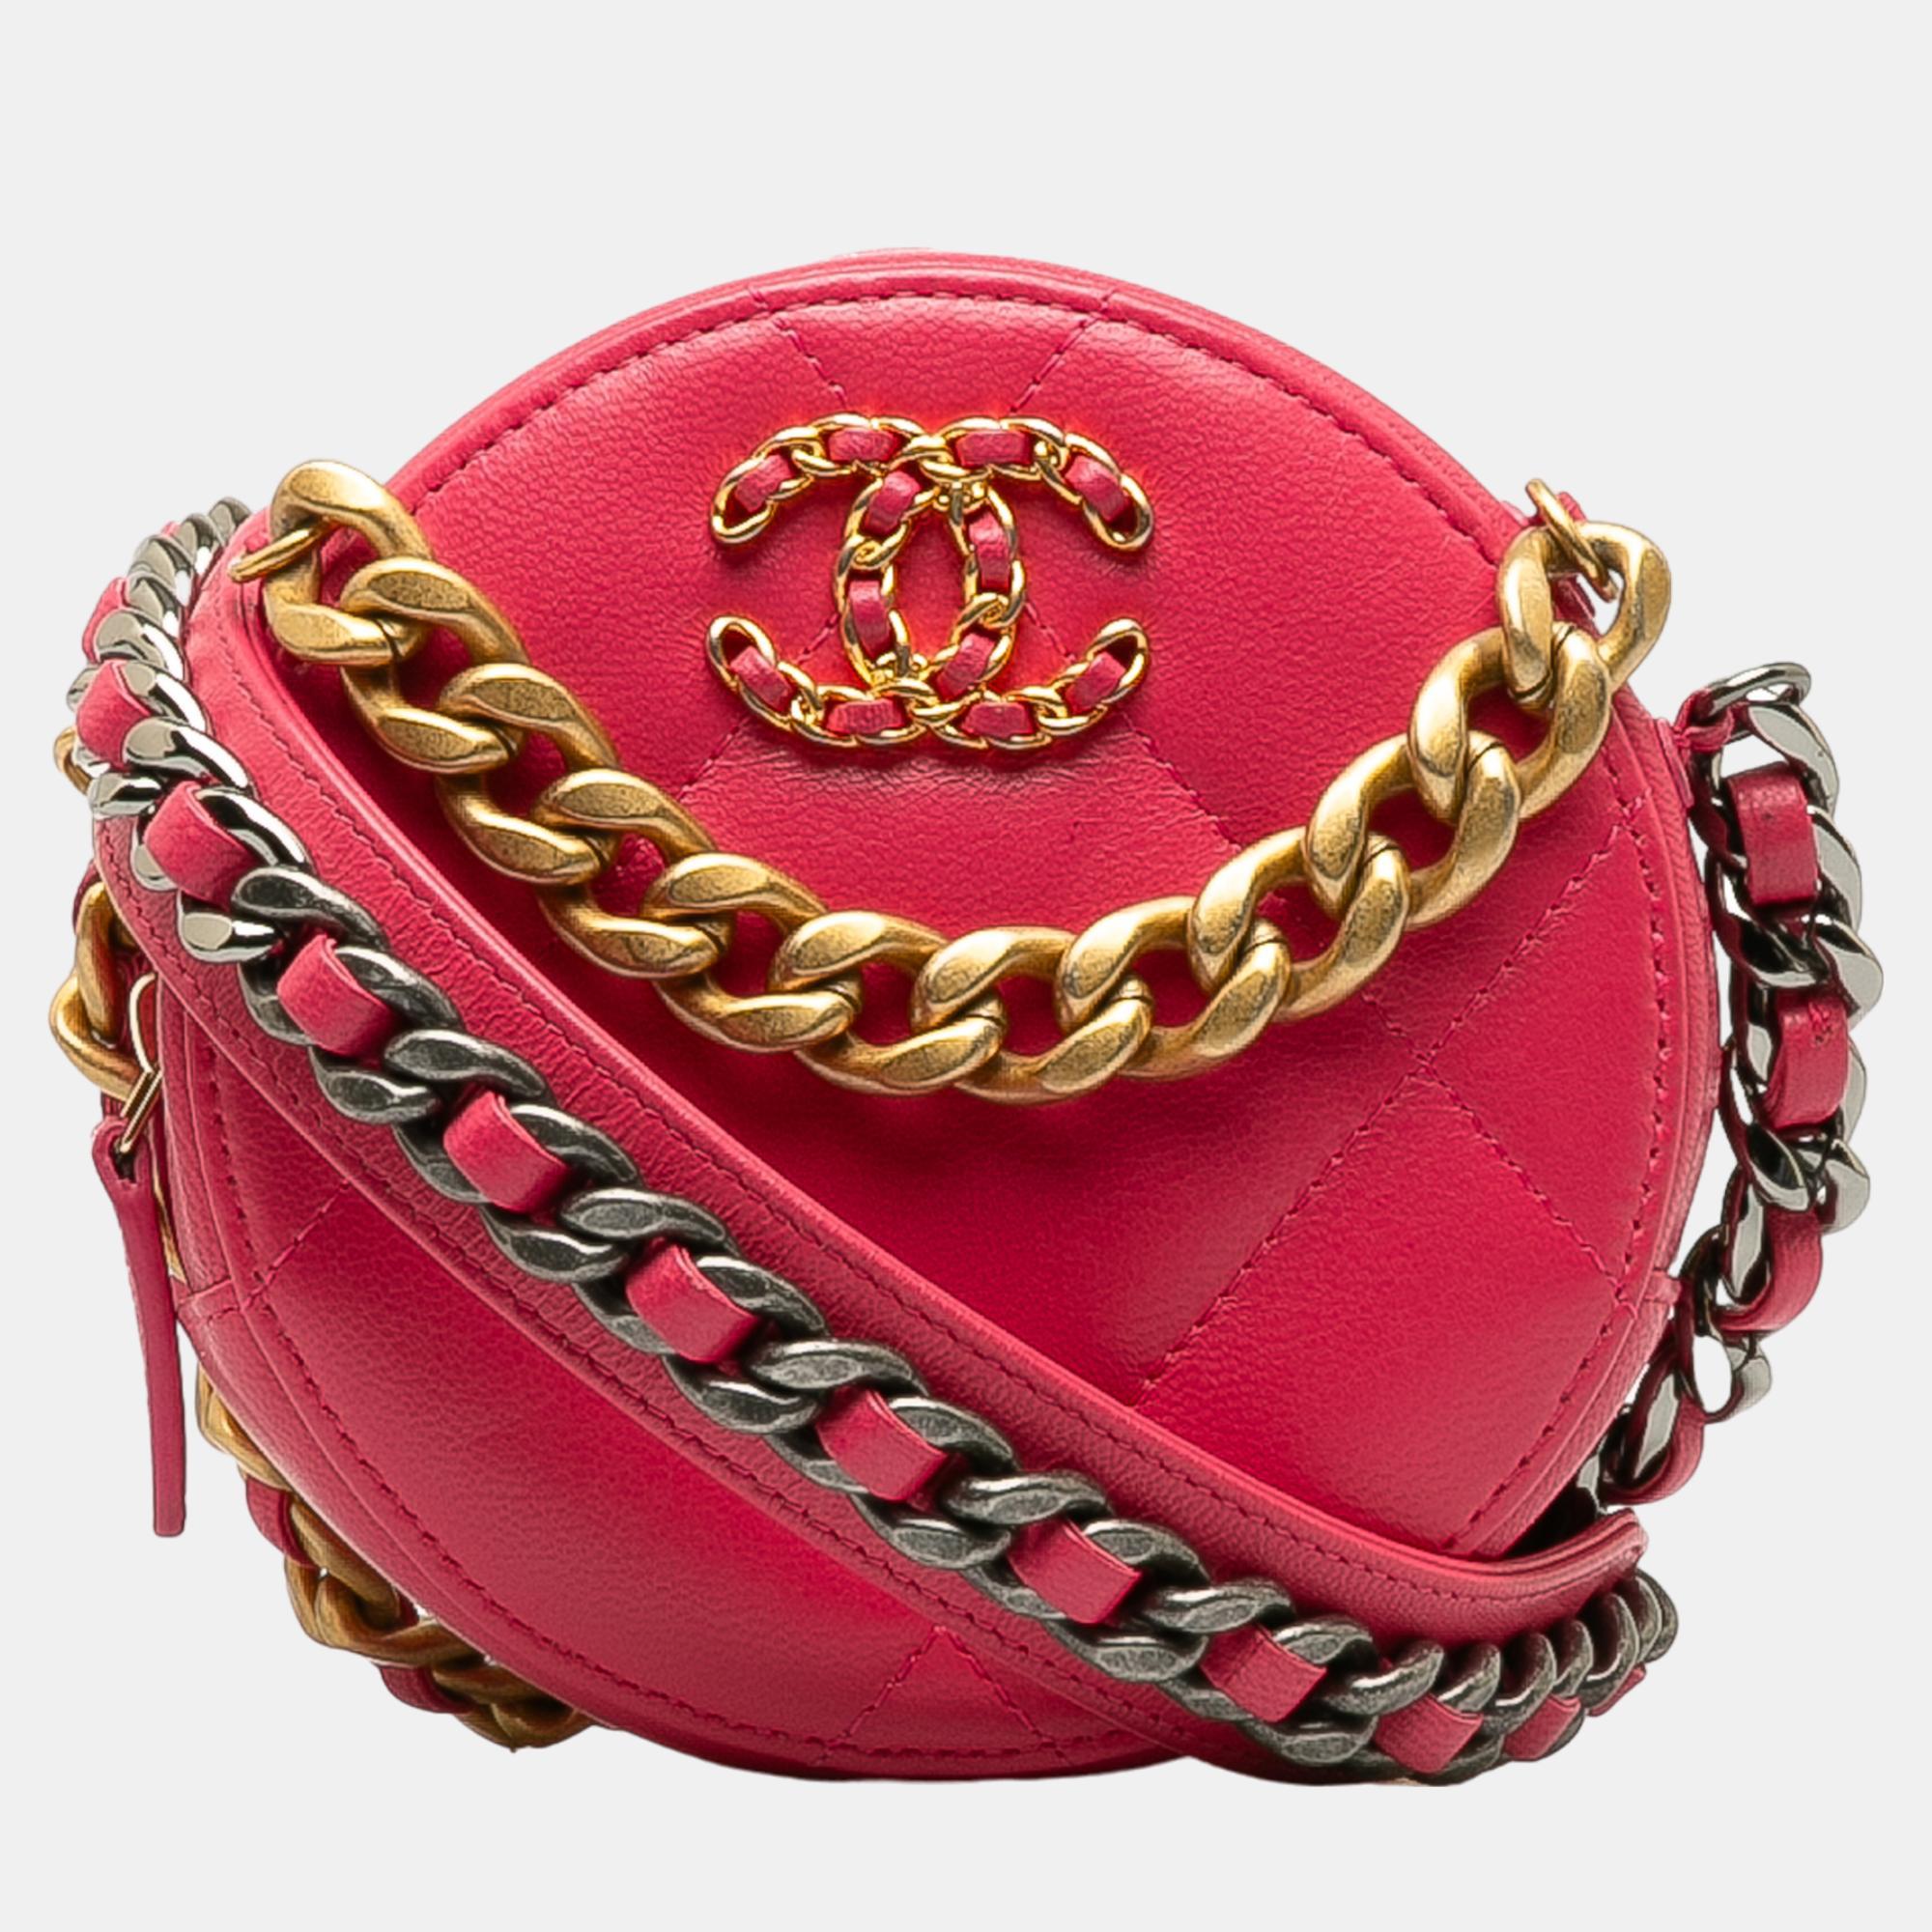 Chanel pink 19 round lambskin clutch with chain